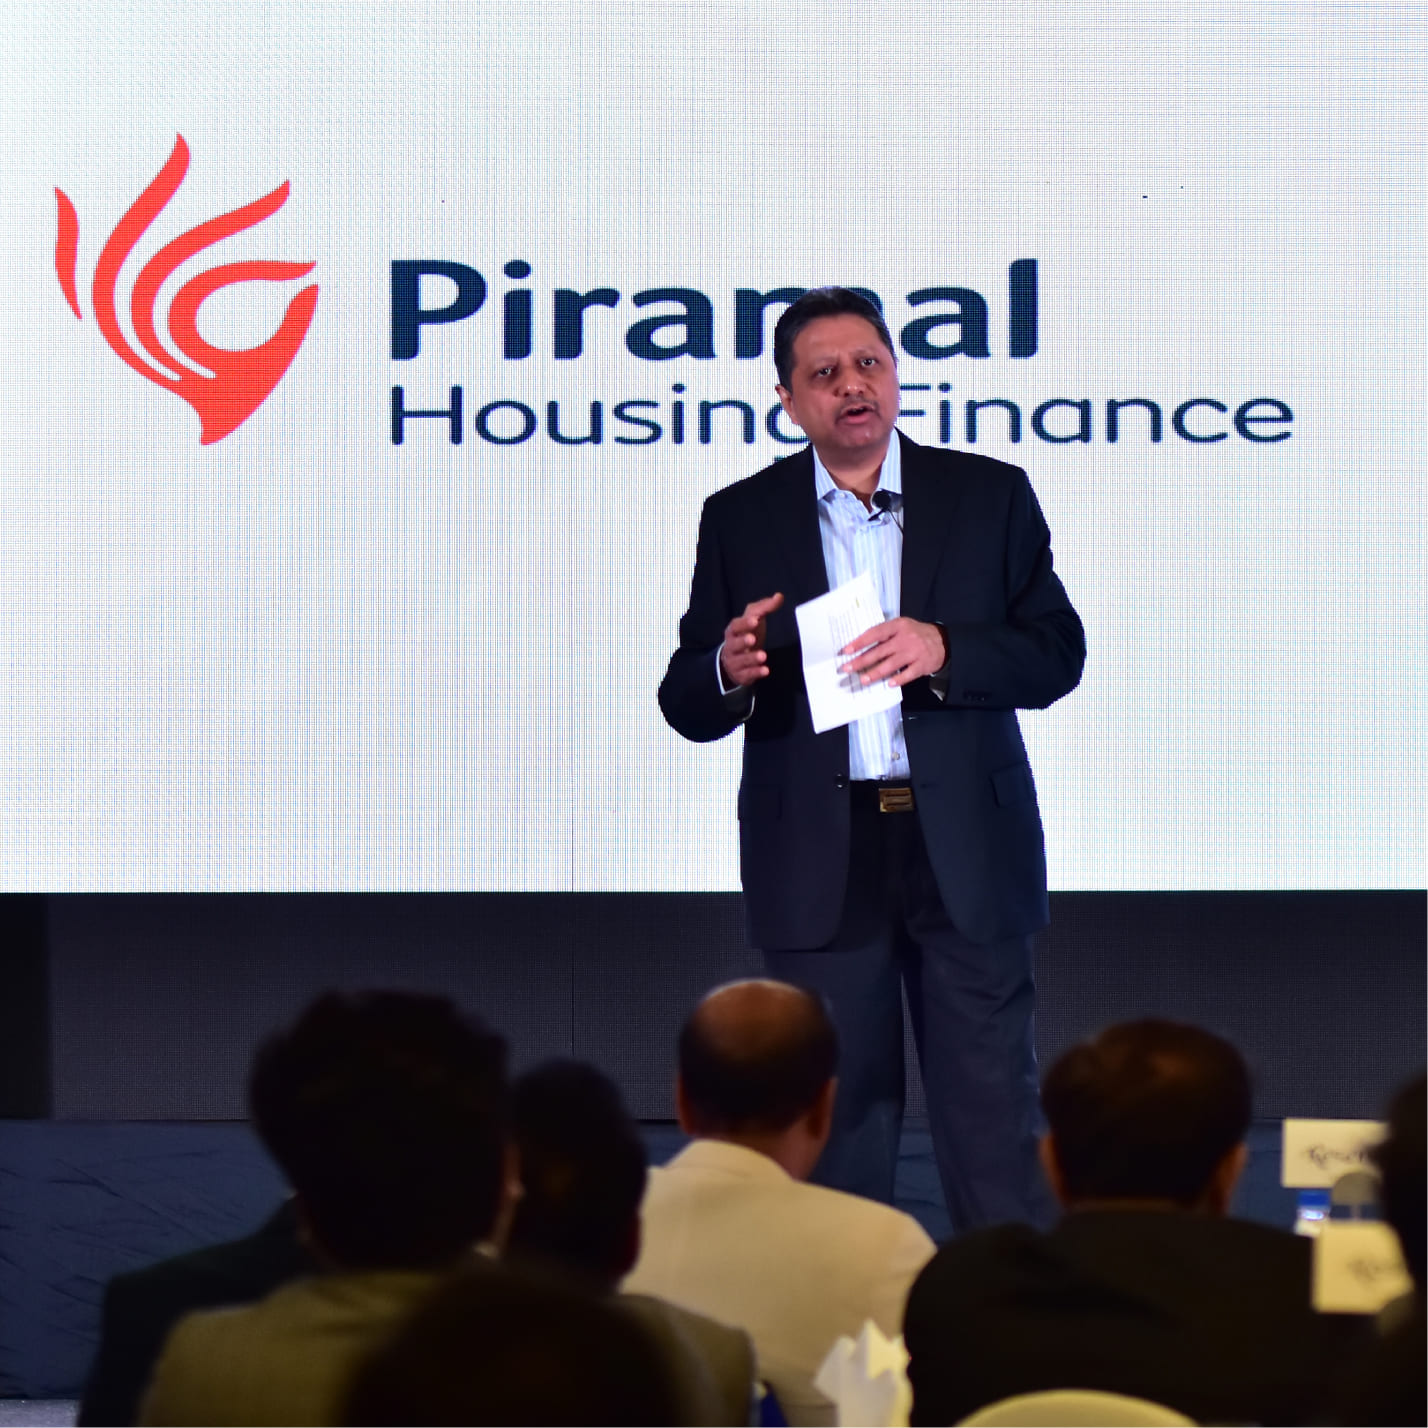 Event management services for Piramal capital housing & Finance